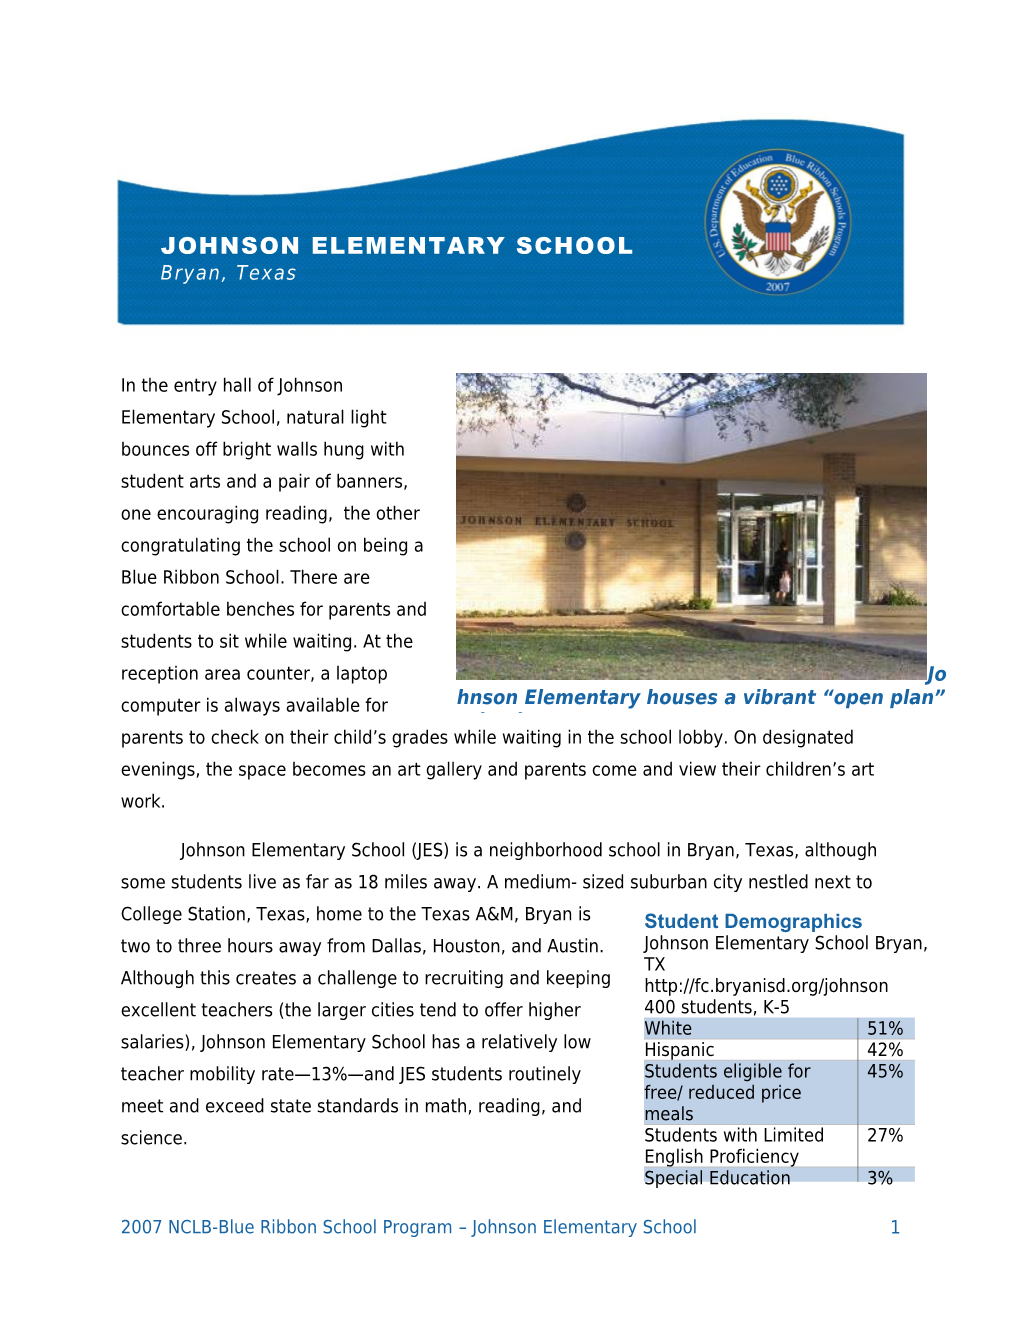 Johnson Elementary School - Learning from High Poverty, High Achieving Blue Ribbon Schools